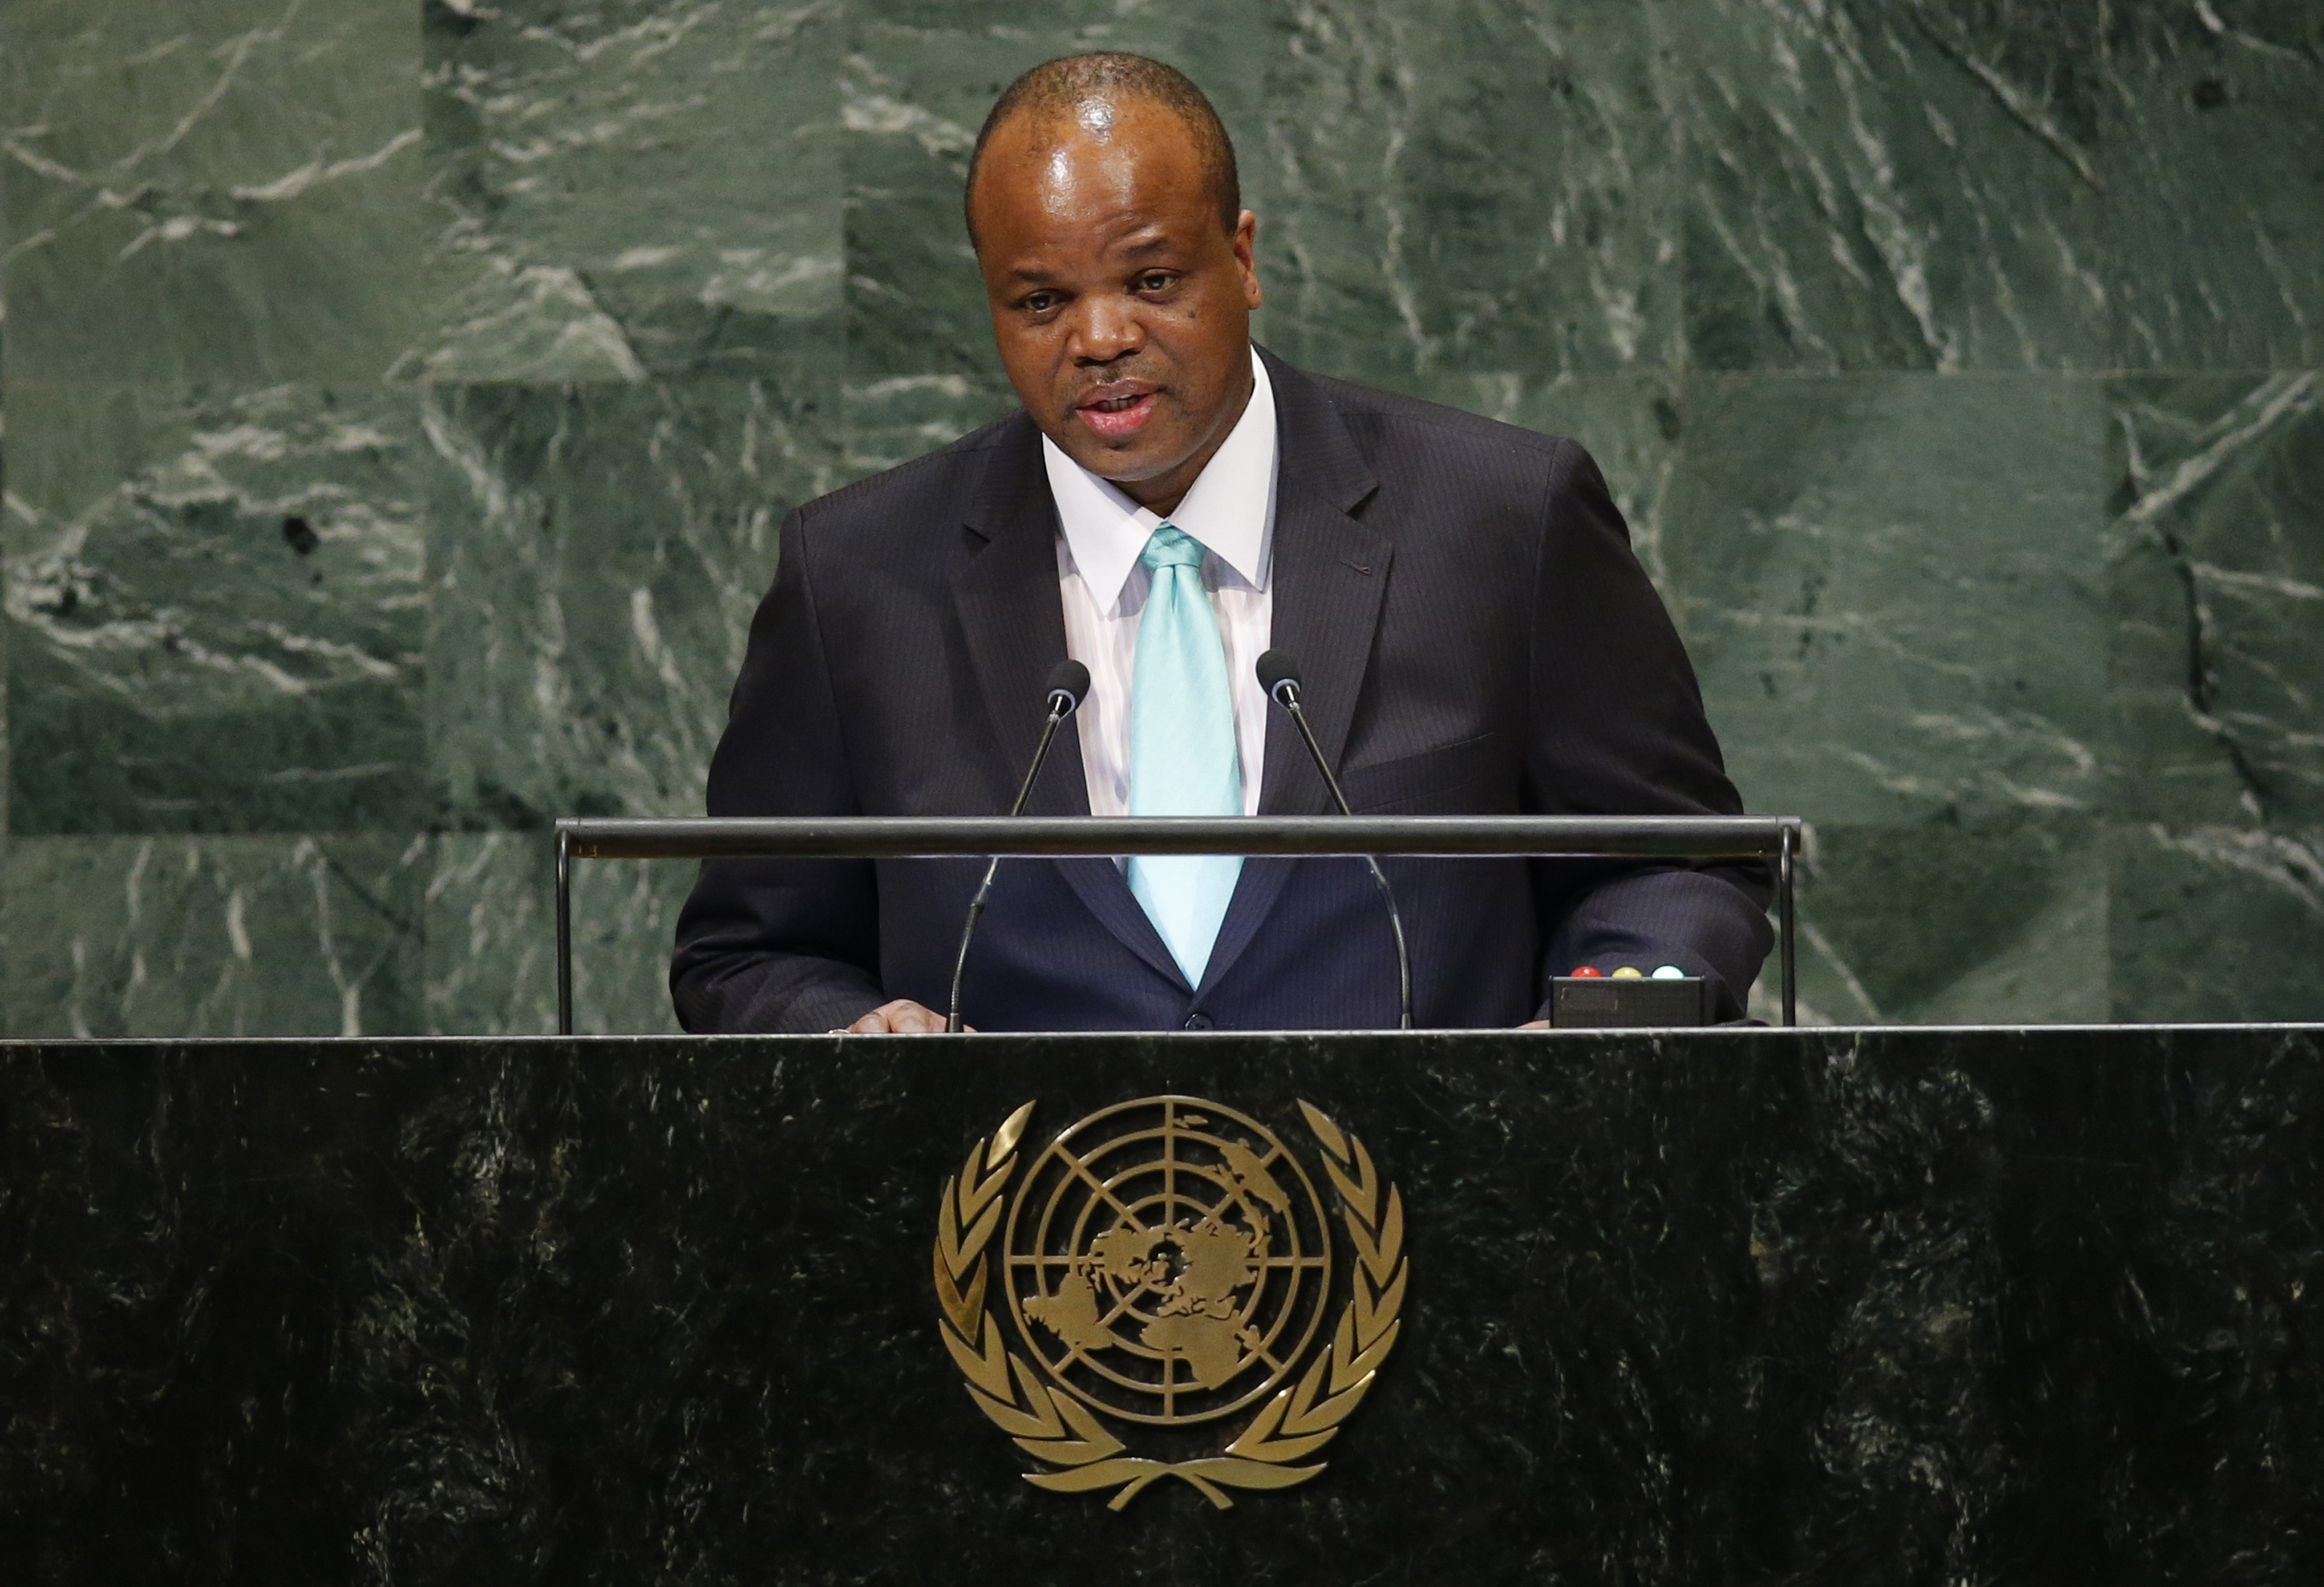 Swaziland's King Mswati III addresses the General Assembly in New York